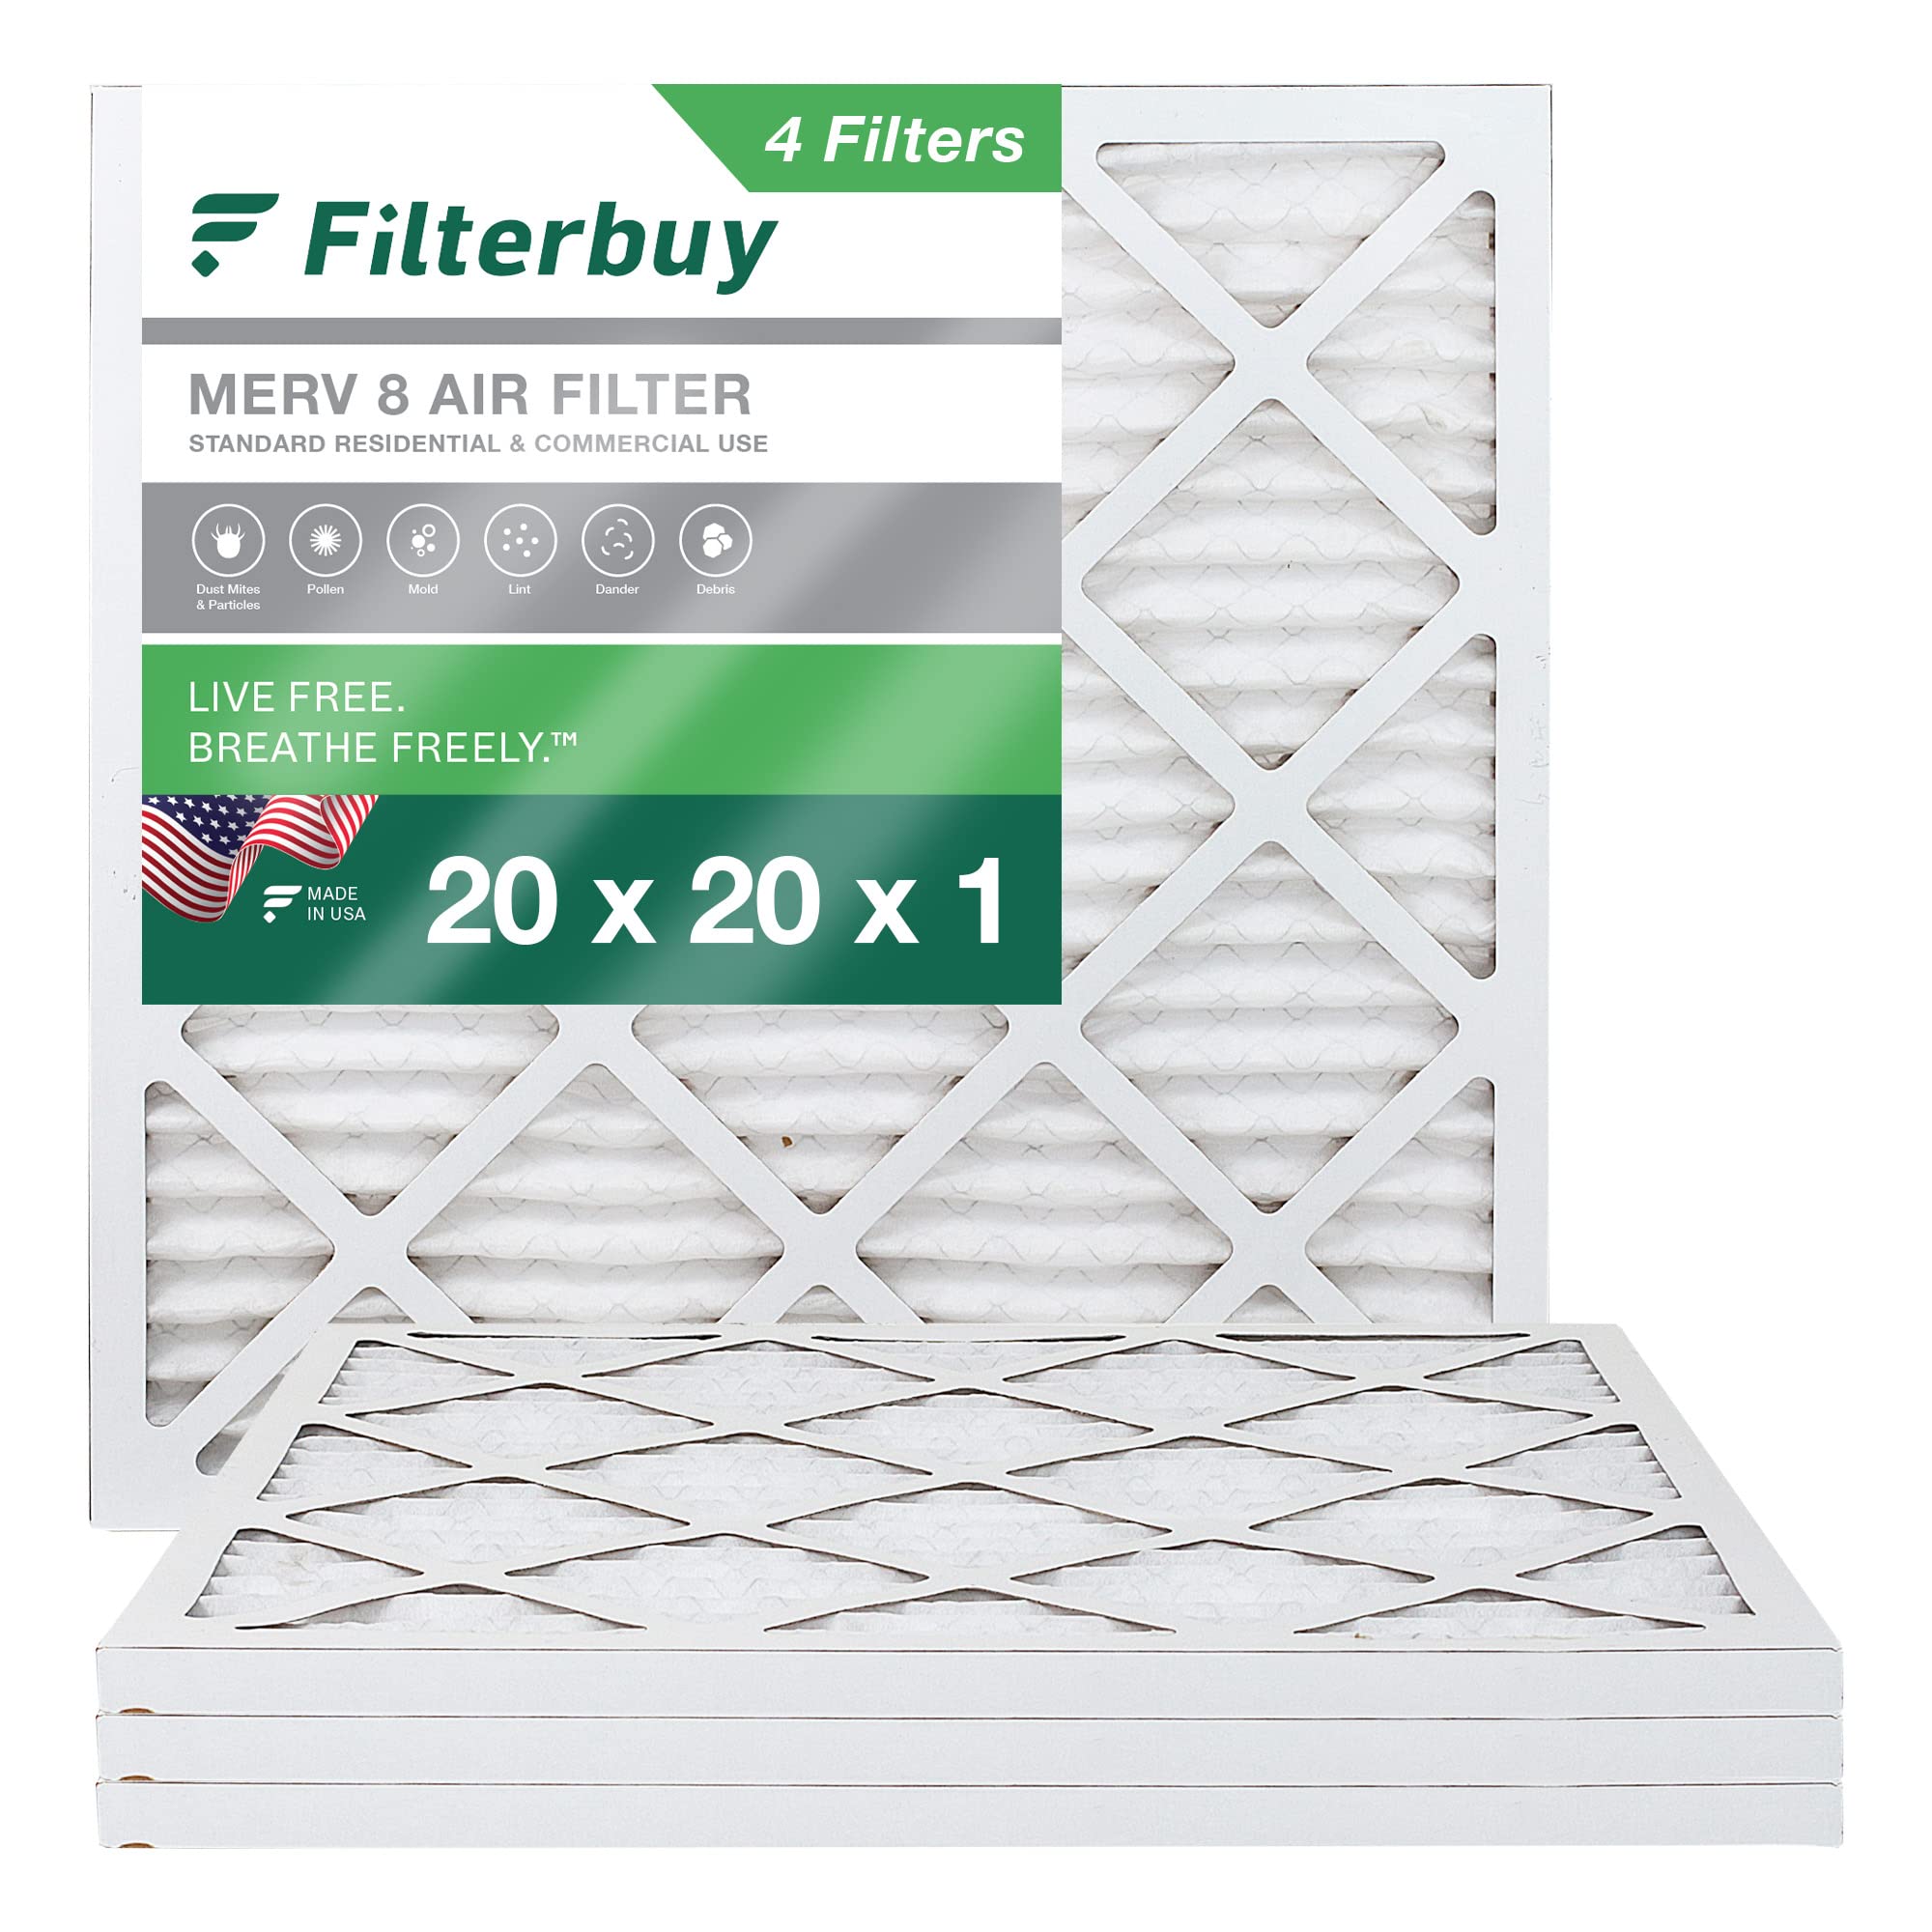 Filterbuy: 4-Pack 20" x 20" x 1" MERV 8 Dust Defense Air Filter $21.20, 4-Pack 12" x 12" x 1" MERV 8 Dust Defense Air Filter $18.17, & More + Free Shipping w/ Prime or on $35+